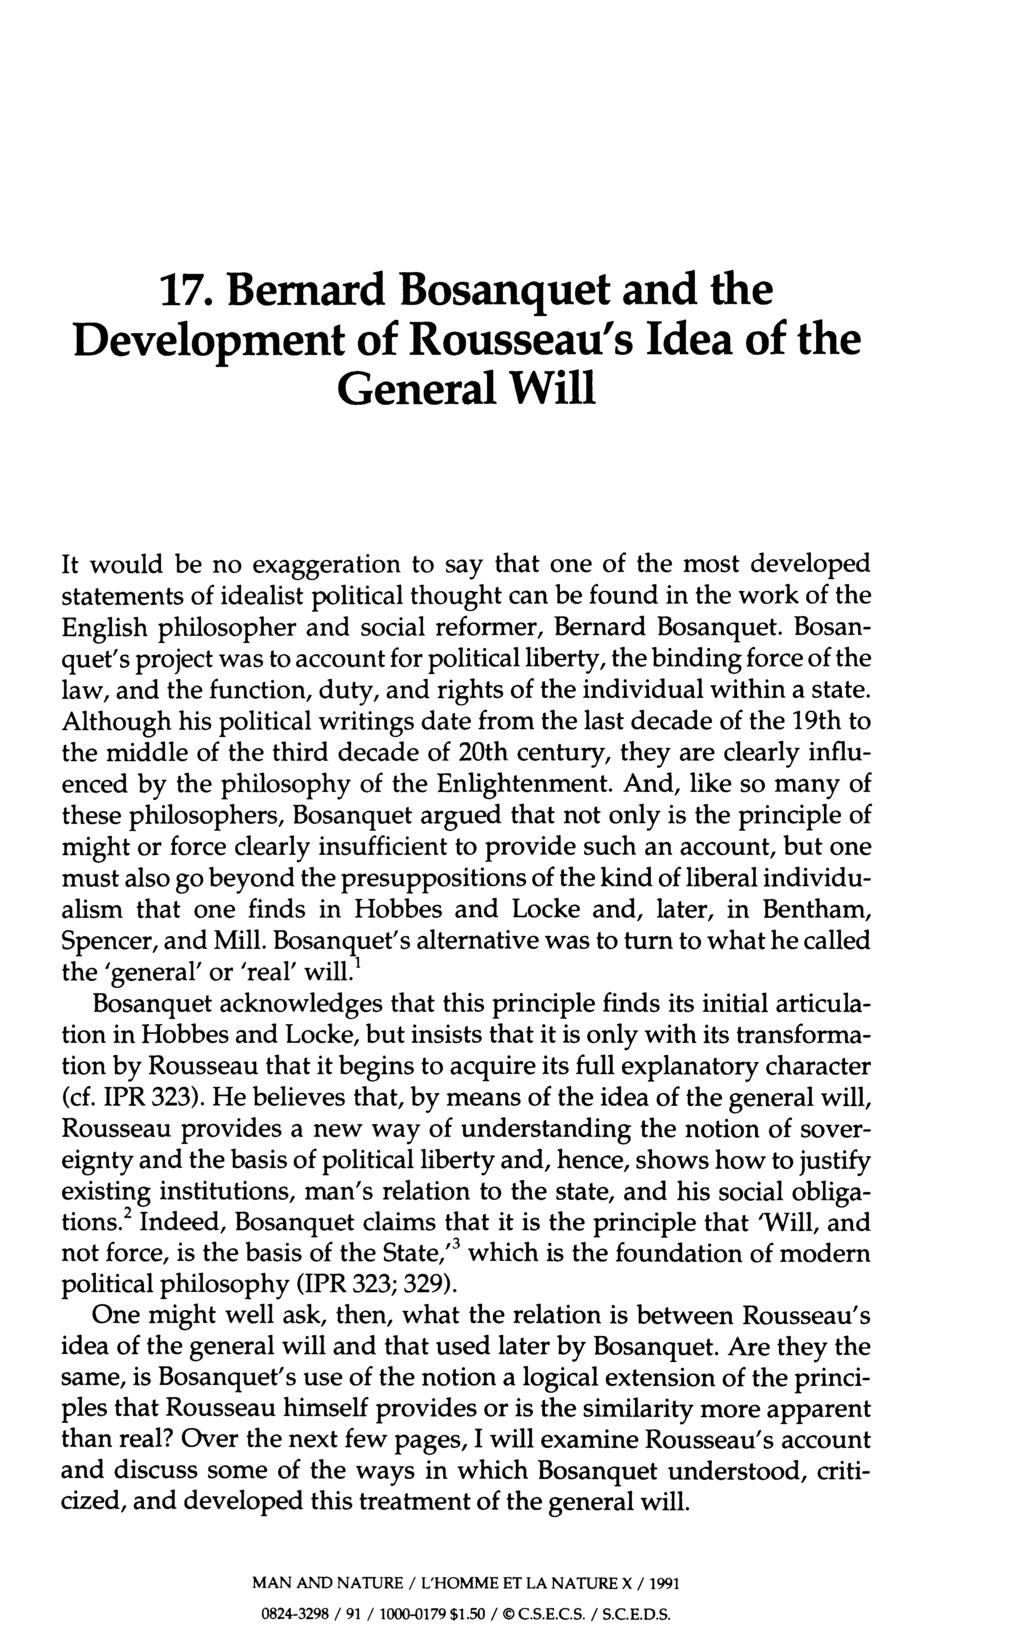 17. Bernard Bosanquet and the Development of Rousseau's Idea of the General Will It would be no exaggeration to say that one of the most developed statements of idealist political thought can be